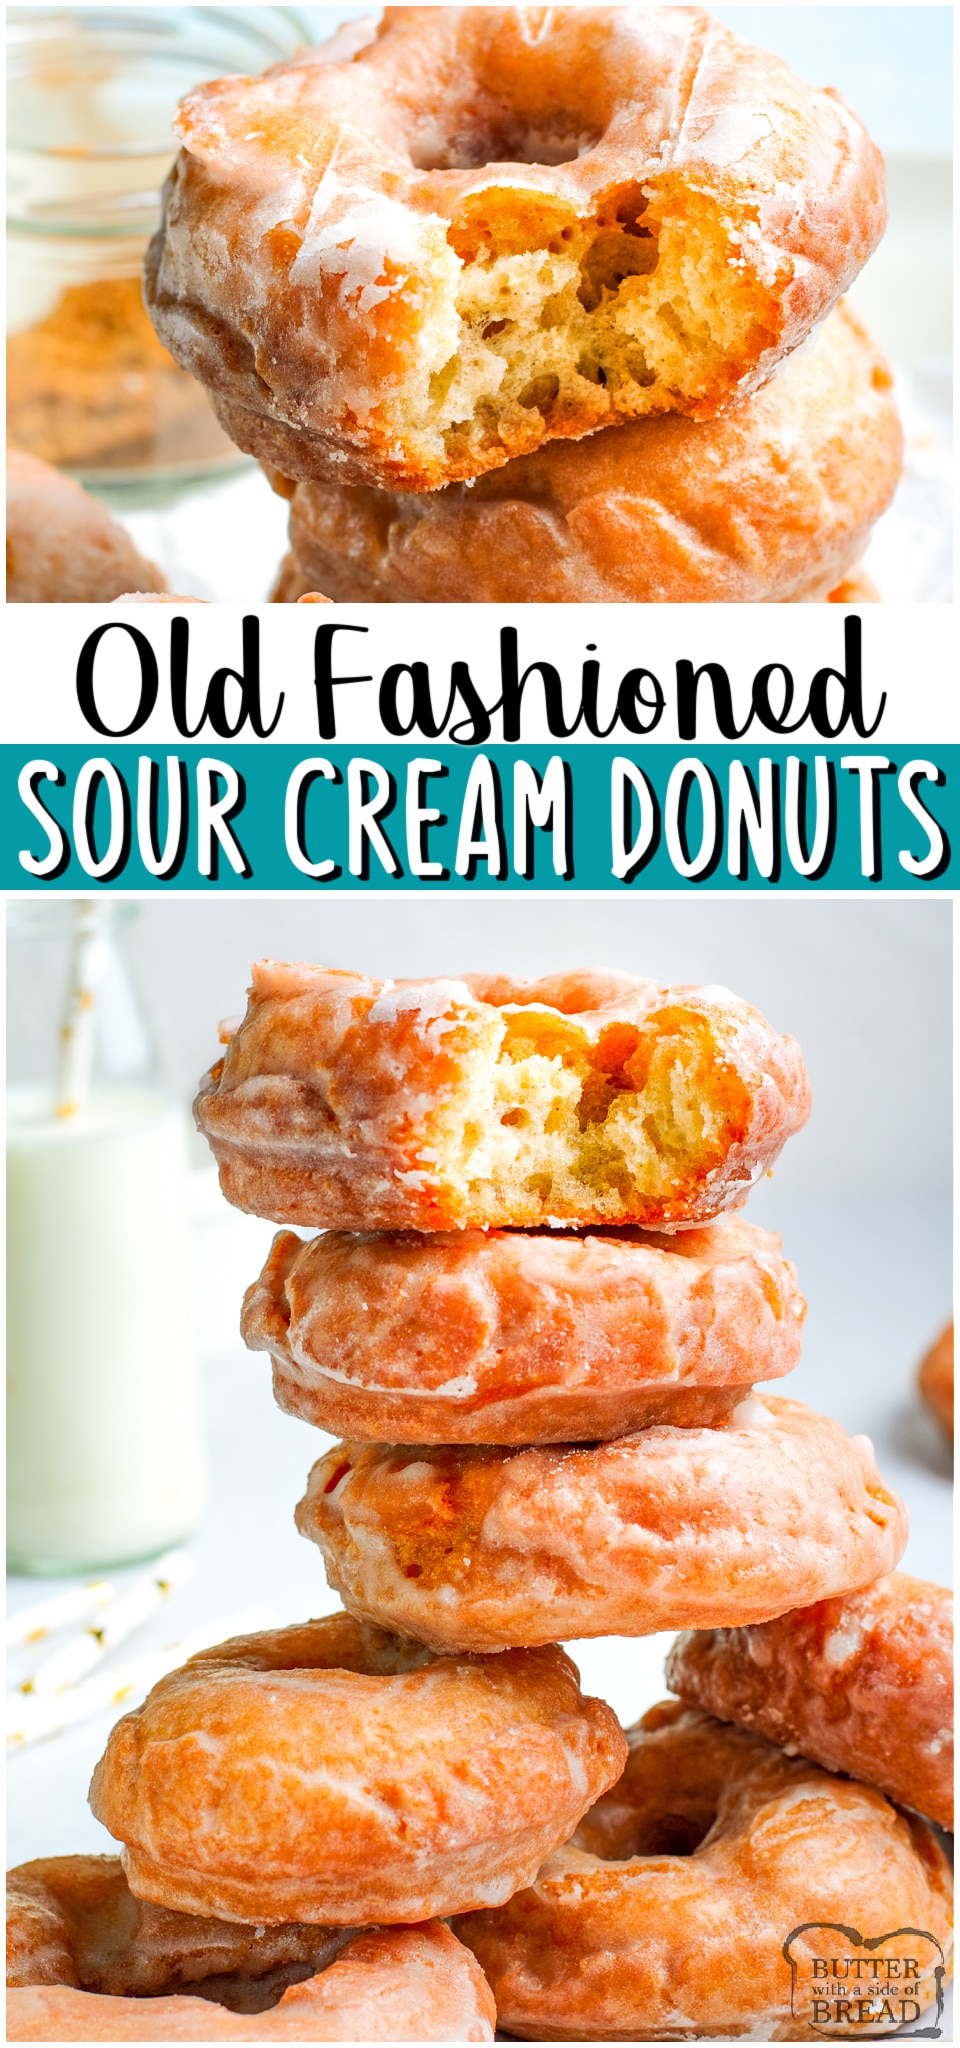 Old Fashioned Sour Cream Donuts made at home with simple ingredients! Easy donut recipe from scratch with no yeast & no rise time! Delicious, tender sour cream doughnuts with a vanilla glaze on top!